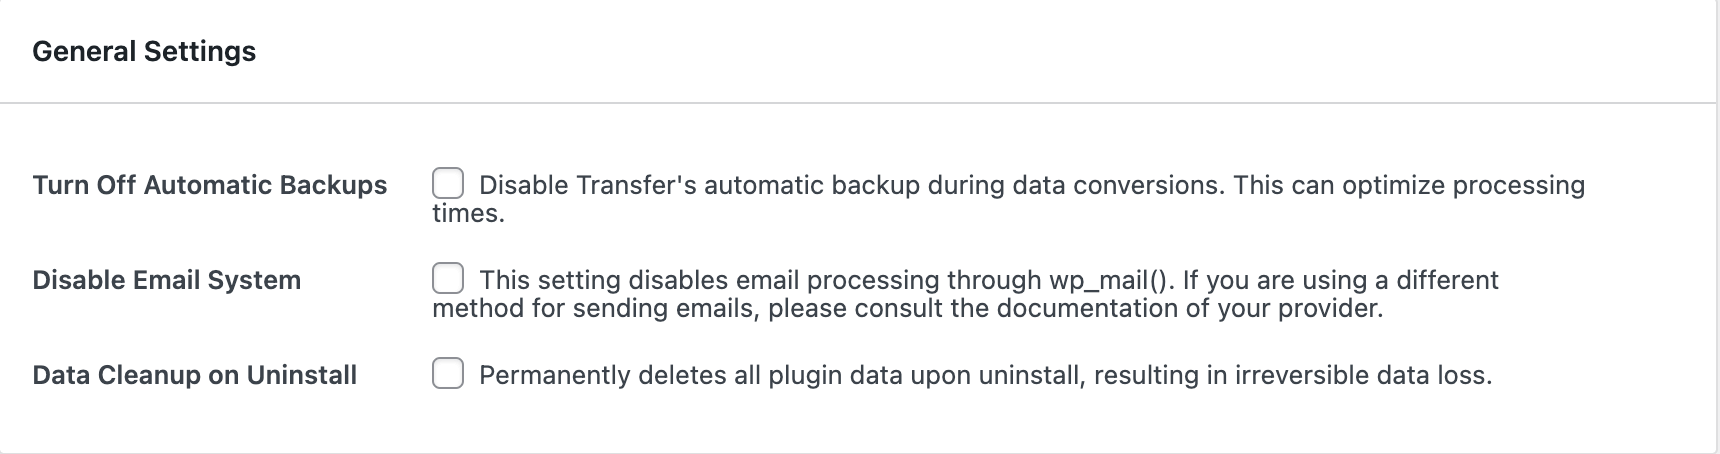 Transfer plugin general settings including the option to turn off auto-backups, disable the email system, and allow data cleanup when uninstalling.